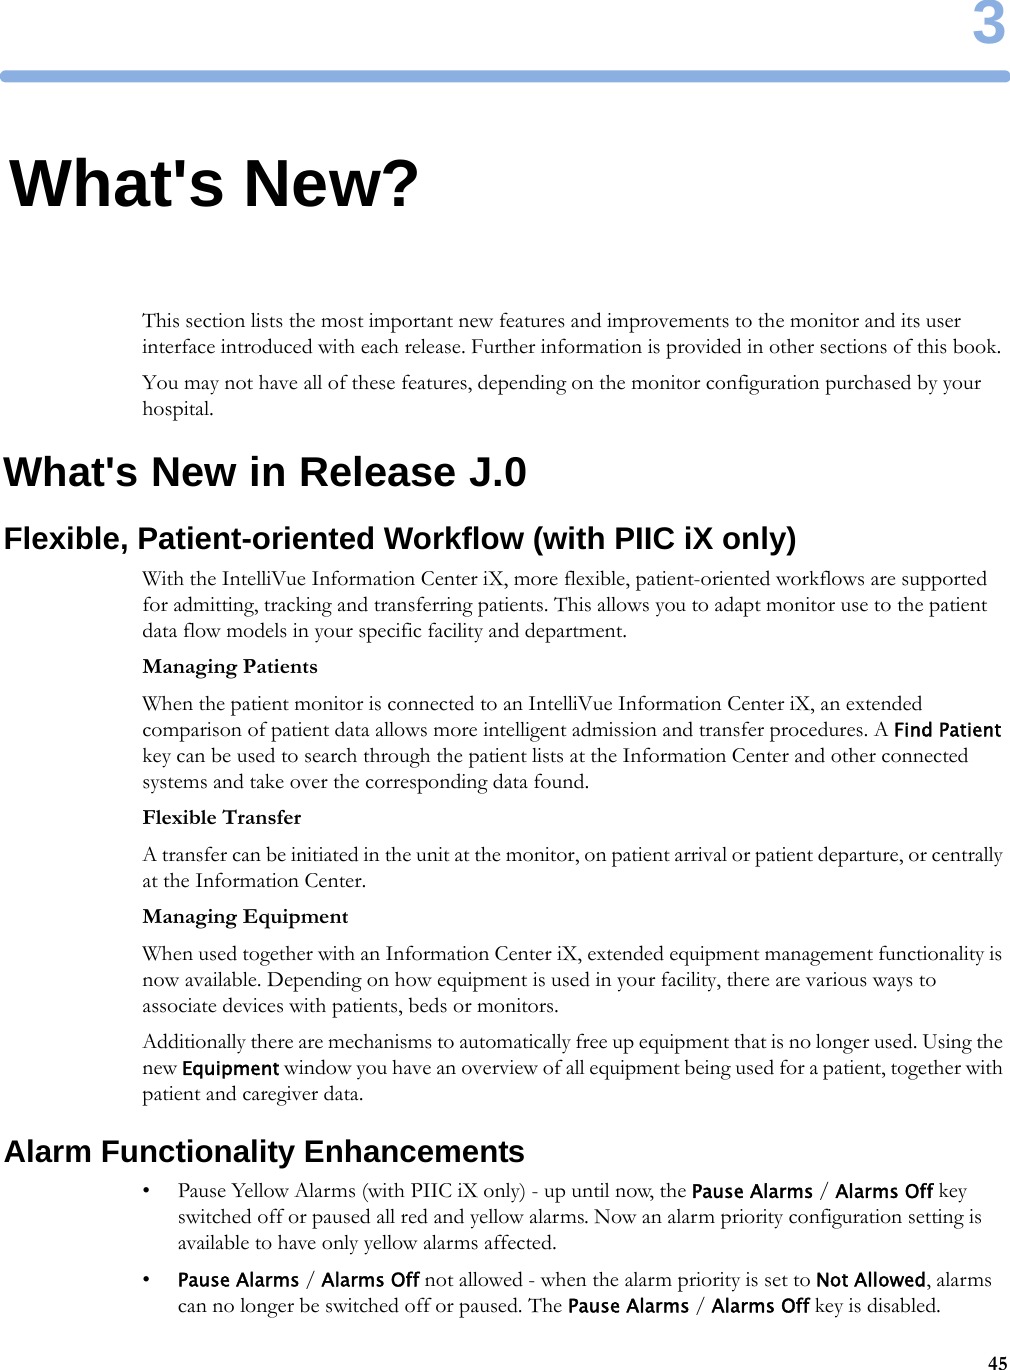 3453What&apos;s New?This section lists the most important new features and improvements to the monitor and its user interface introduced with each release. Further information is provided in other sections of this book.You may not have all of these features, depending on the monitor configuration purchased by your hospital.What&apos;s New in Release J.0Flexible, Patient-oriented Workflow (with PIIC iX only)With the IntelliVue Information Center iX, more flexible, patient-oriented workflows are supported for admitting, tracking and transferring patients. This allows you to adapt monitor use to the patient data flow models in your specific facility and department.Managing PatientsWhen the patient monitor is connected to an IntelliVue Information Center iX, an extended comparison of patient data allows more intelligent admission and transfer procedures. A Find Patient key can be used to search through the patient lists at the Information Center and other connected systems and take over the corresponding data found.Flexible TransferA transfer can be initiated in the unit at the monitor, on patient arrival or patient departure, or centrally at the Information Center.Managing EquipmentWhen used together with an Information Center iX, extended equipment management functionality is now available. Depending on how equipment is used in your facility, there are various ways to associate devices with patients, beds or monitors.Additionally there are mechanisms to automatically free up equipment that is no longer used. Using the new Equipment window you have an overview of all equipment being used for a patient, together with patient and caregiver data.Alarm Functionality Enhancements• Pause Yellow Alarms (with PIIC iX only) - up until now, the Pause Alarms / Alarms Off key switched off or paused all red and yellow alarms. Now an alarm priority configuration setting is available to have only yellow alarms affected.•Pause Alarms / Alarms Off not allowed - when the alarm priority is set to Not Allowed, alarms can no longer be switched off or paused. The Pause Alarms / Alarms Off key is disabled.